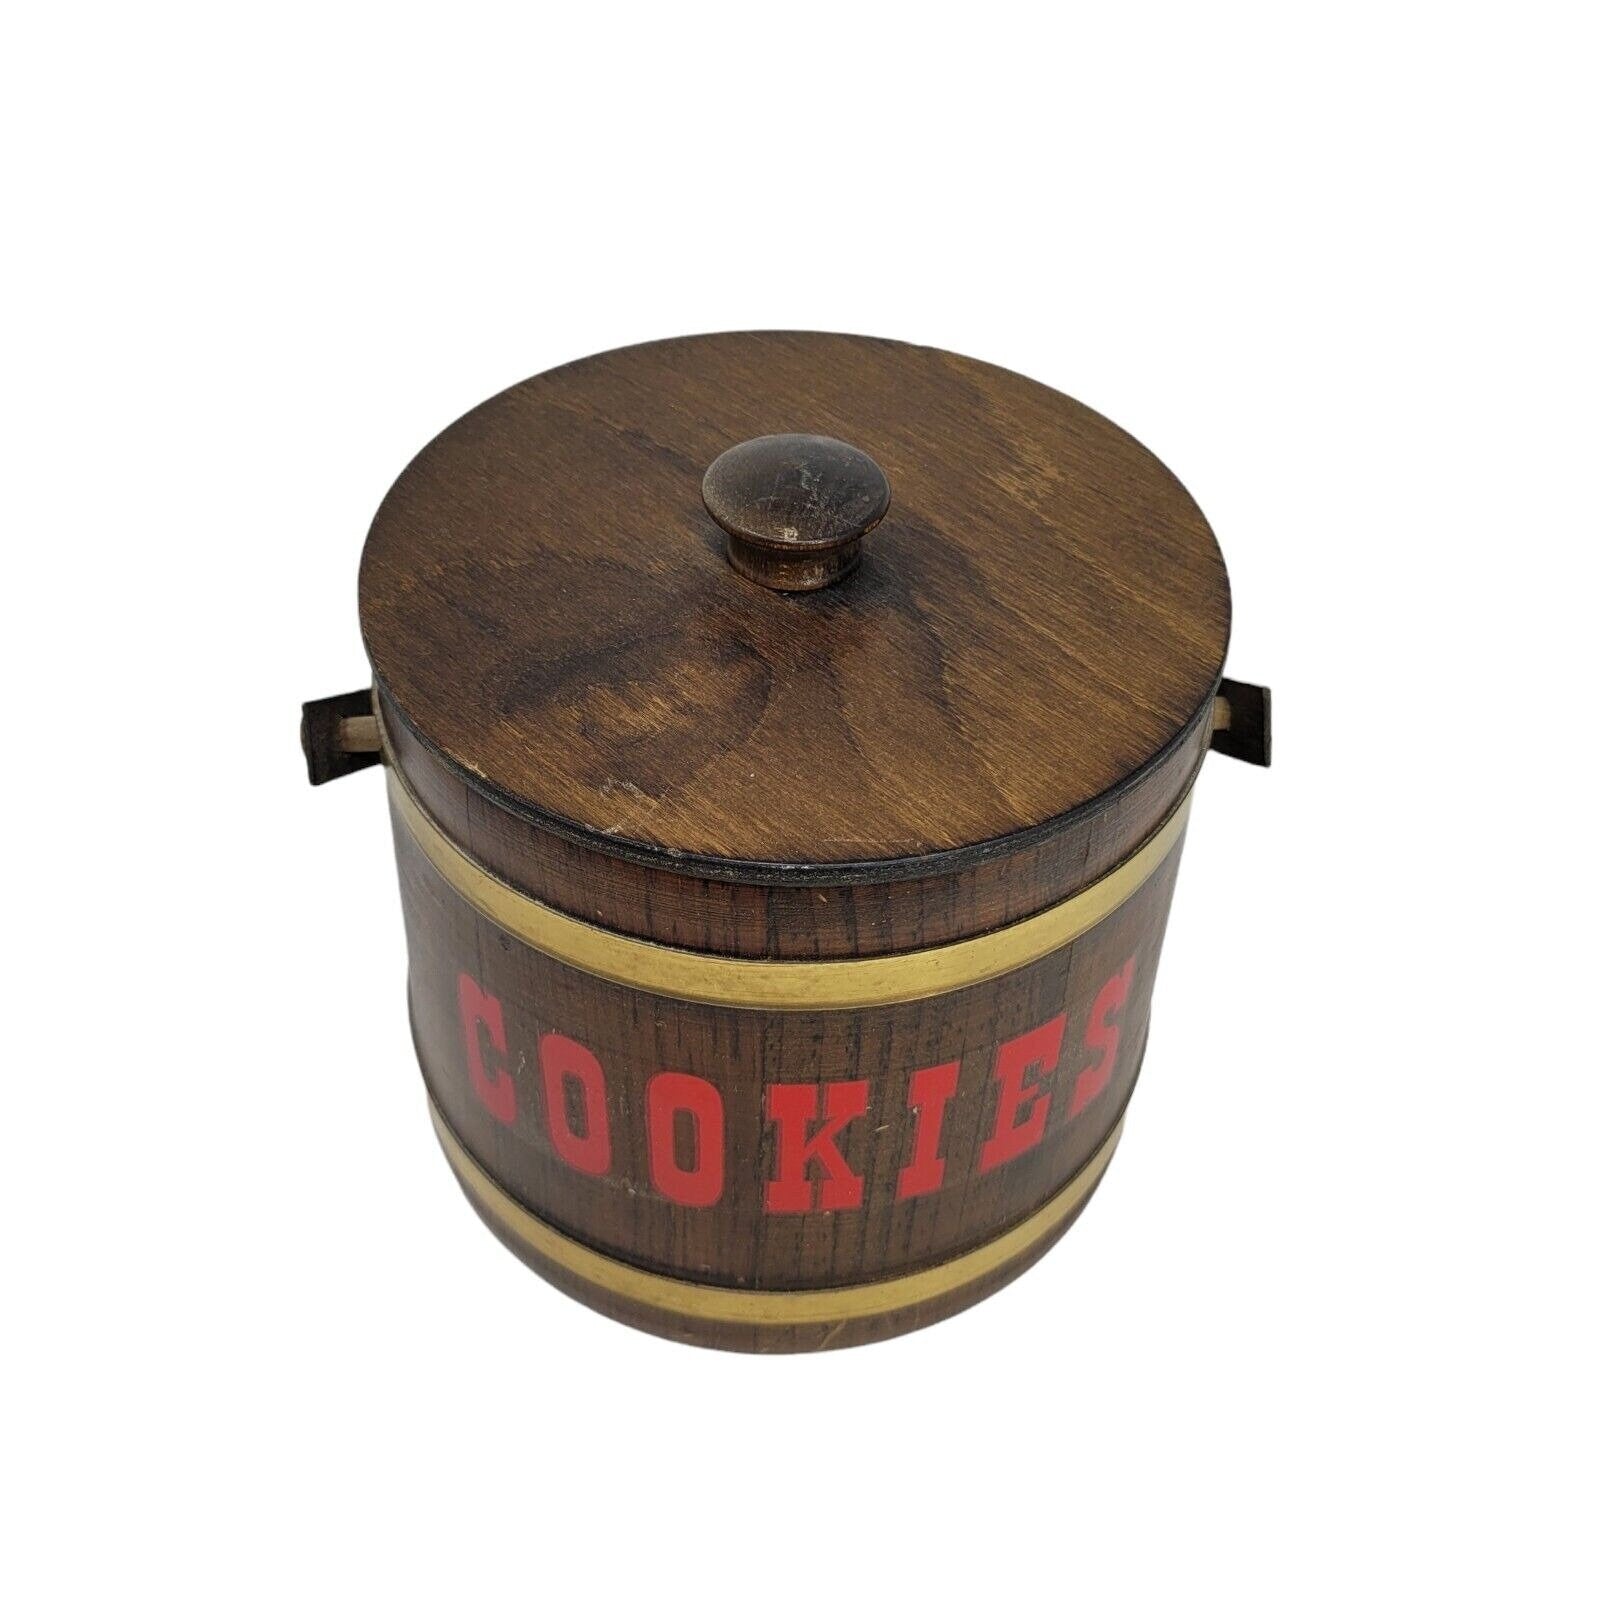 Personalized Wooden Barrel 1L 3L 5L With Lid for Honey, Cookie Jar